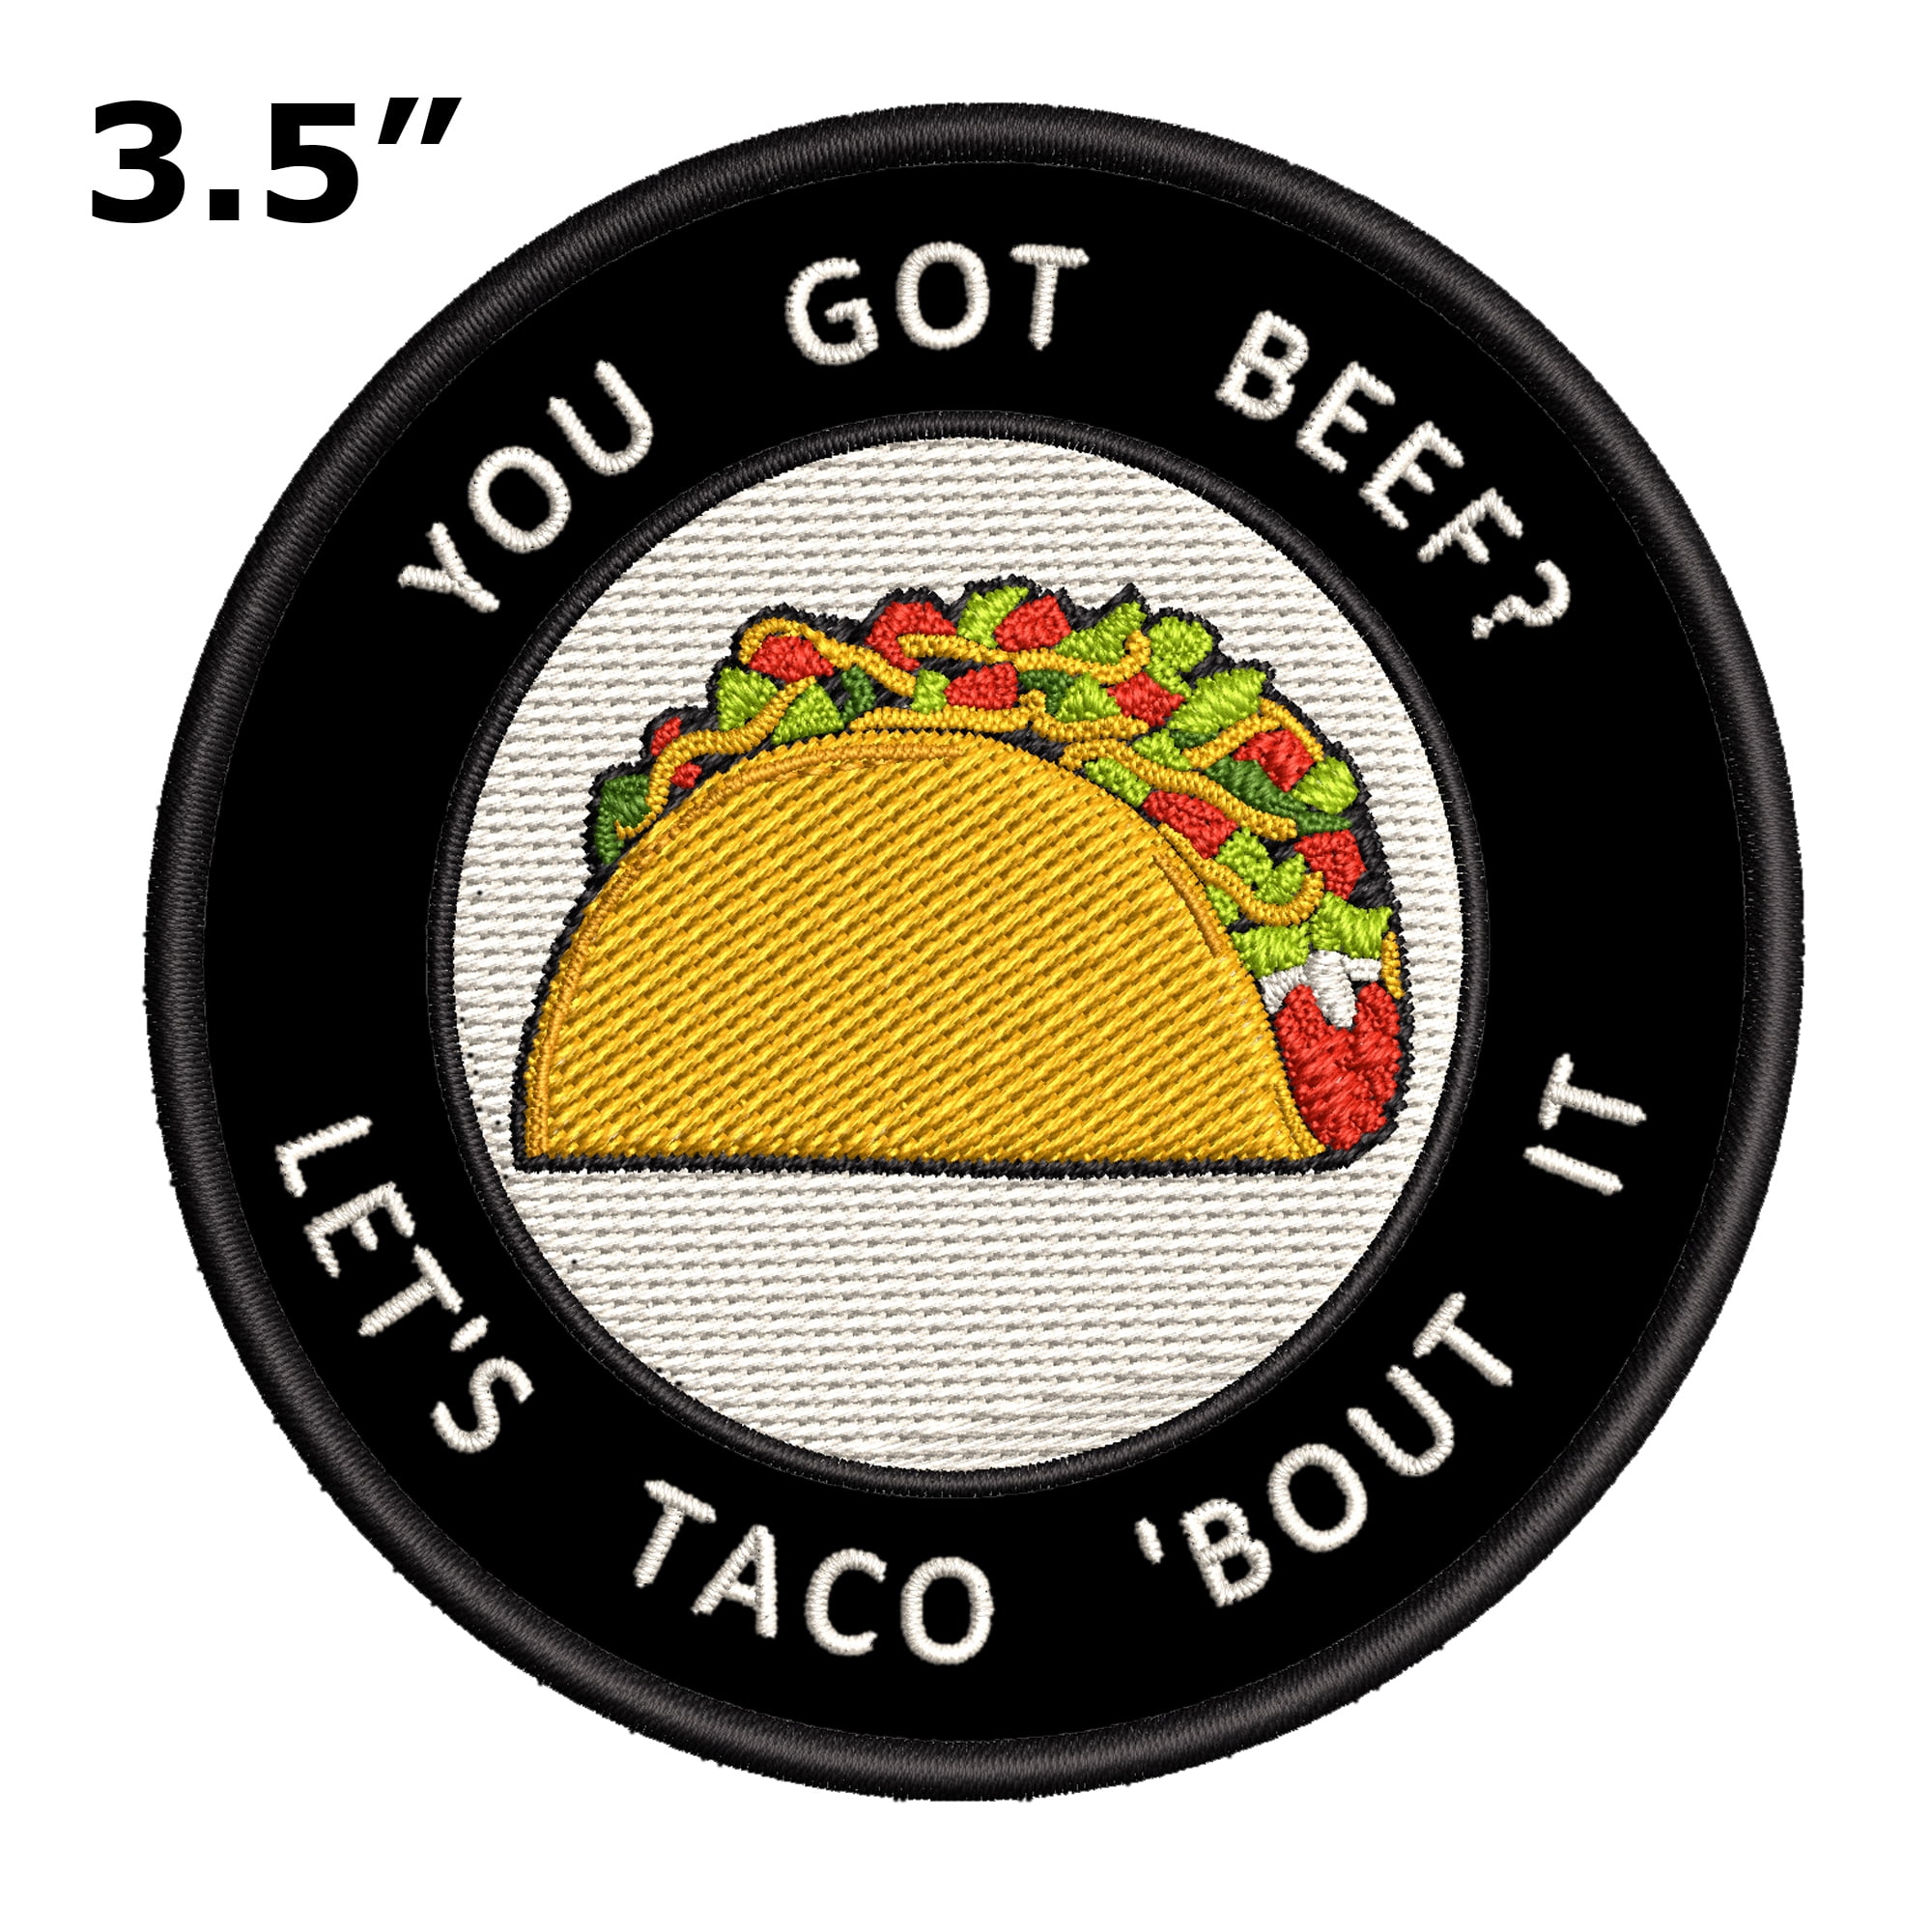 You Got Beef? - 3.5 - Iron-On or Sew-On Embroidered Patch Novelty